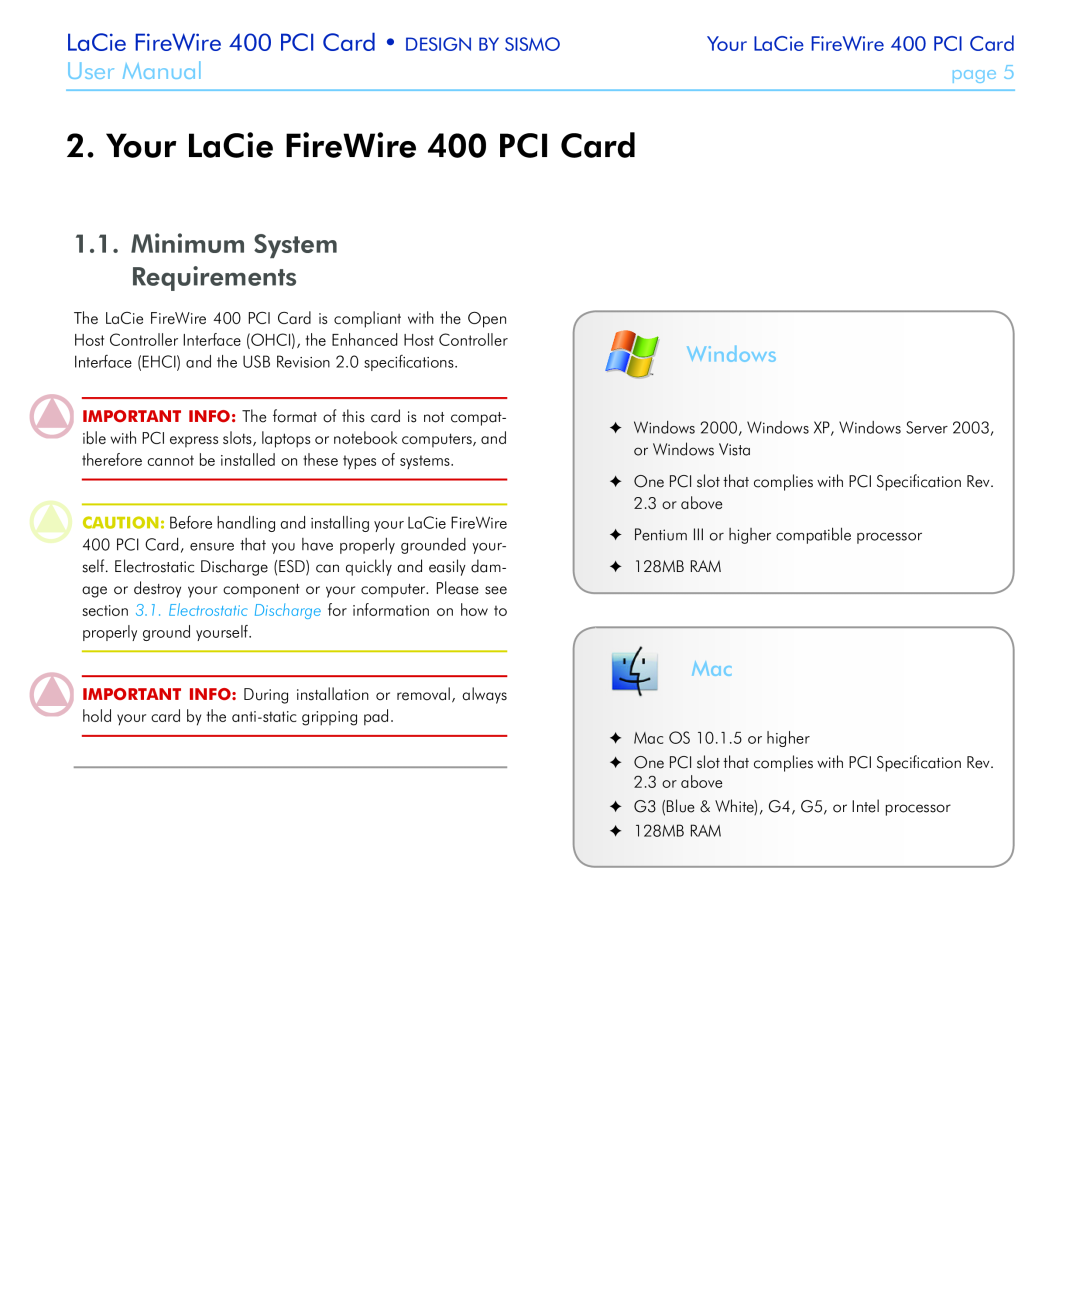 LaCie user manual Your LaCie FireWire 400 PCI Card, Minimum System Requirements, Windows, User Manual, page 